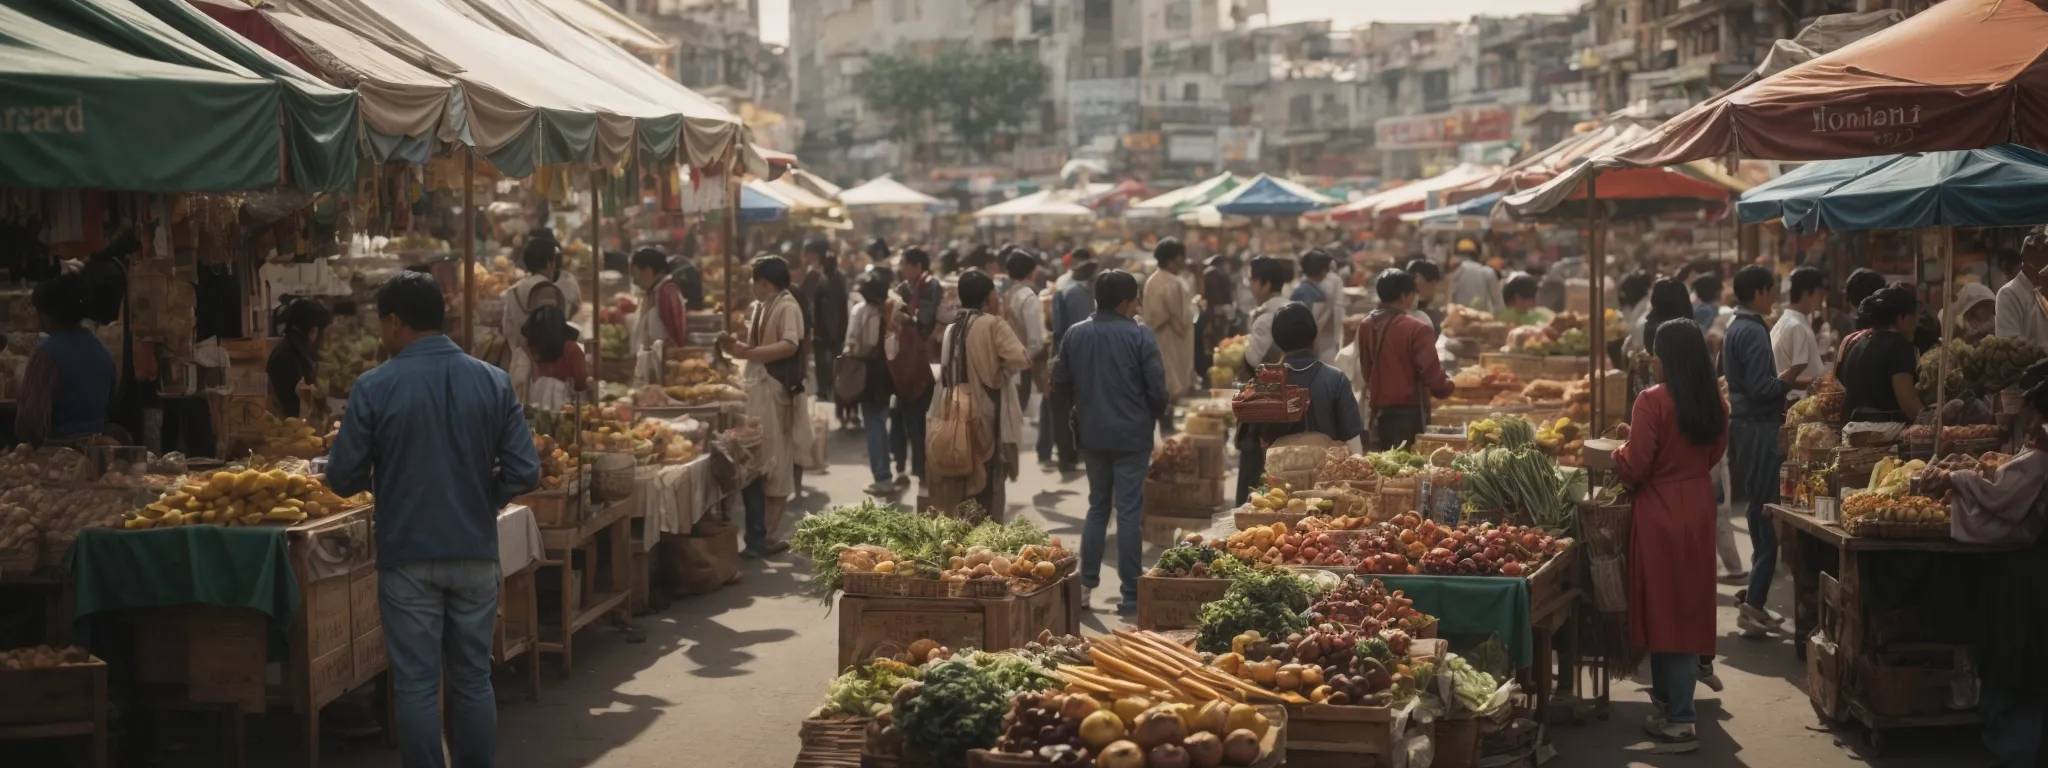 a bustling outdoor market scene with diverse local businesses actively engaging with customers.